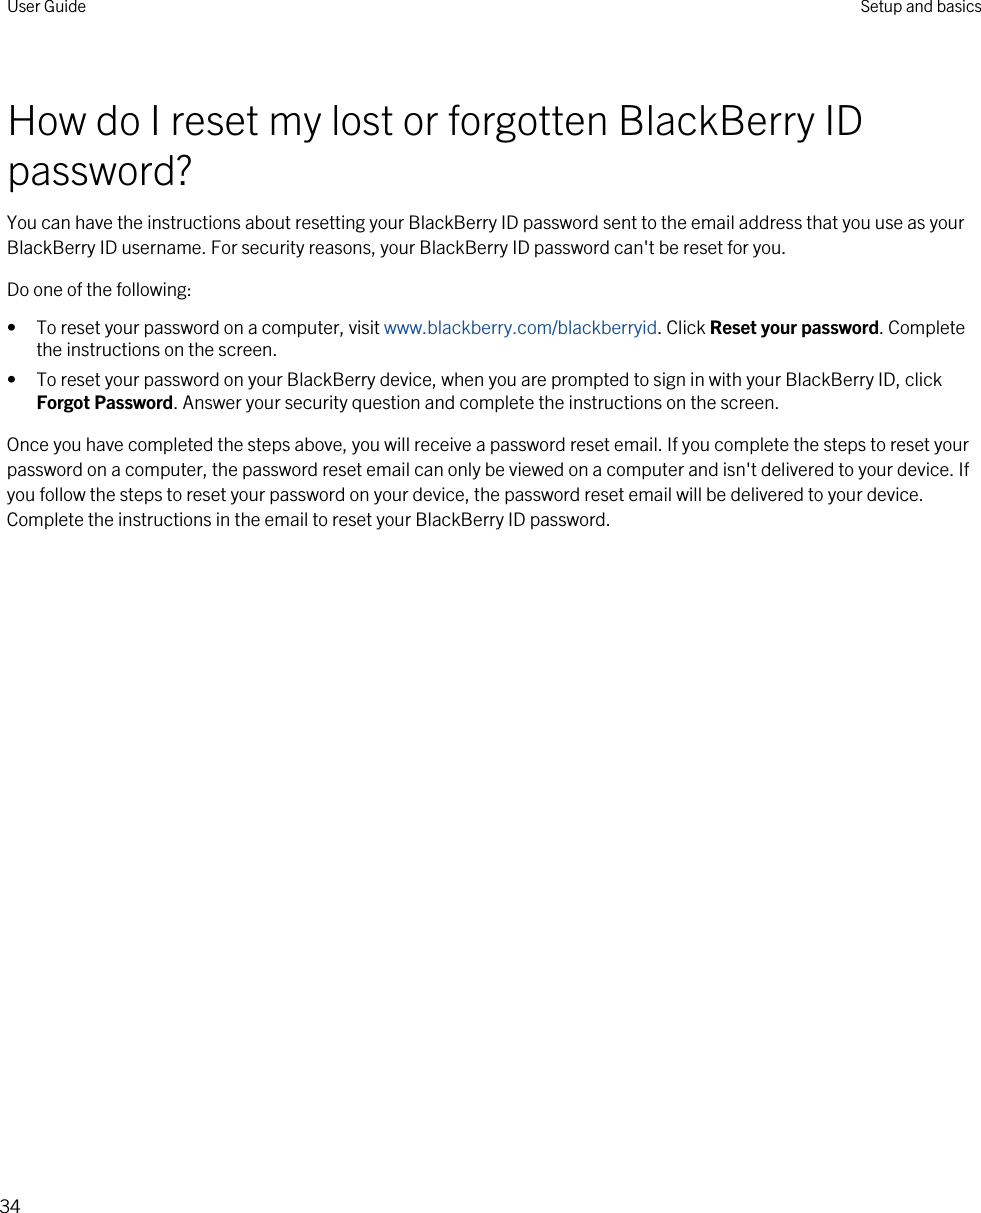 How do I reset my lost or forgotten BlackBerry ID password?You can have the instructions about resetting your BlackBerry ID password sent to the email address that you use as your BlackBerry ID username. For security reasons, your BlackBerry ID password can&apos;t be reset for you.Do one of the following:• To reset your password on a computer, visit www.blackberry.com/blackberryid. Click Reset your password. Complete the instructions on the screen.• To reset your password on your BlackBerry device, when you are prompted to sign in with your BlackBerry ID, click Forgot Password. Answer your security question and complete the instructions on the screen.Once you have completed the steps above, you will receive a password reset email. If you complete the steps to reset your password on a computer, the password reset email can only be viewed on a computer and isn&apos;t delivered to your device. If you follow the steps to reset your password on your device, the password reset email will be delivered to your device. Complete the instructions in the email to reset your BlackBerry ID password.User Guide Setup and basics34